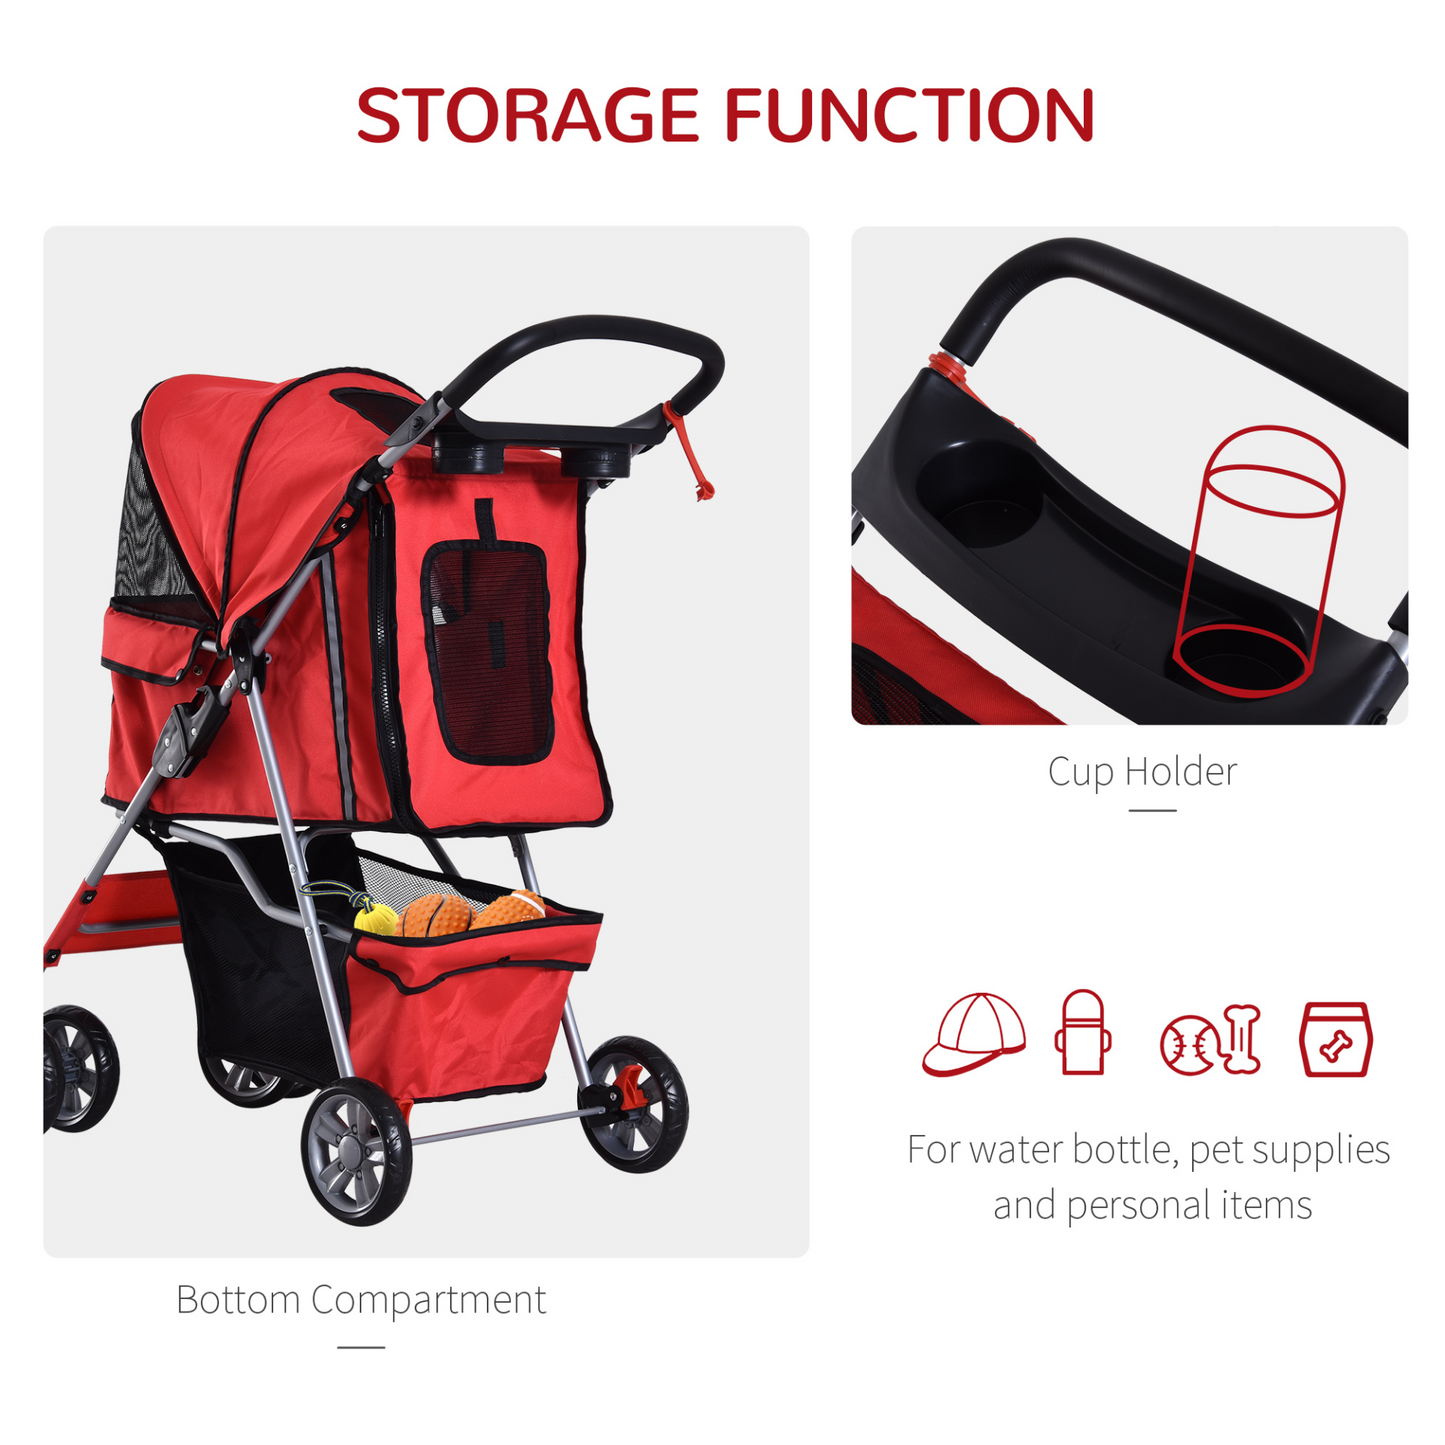 PawHut Pet Stroller for Small Miniature Dogs Cats Foldable Travel Carriage with Wheels Zipper Entry Cup Holder Storage Basket Red